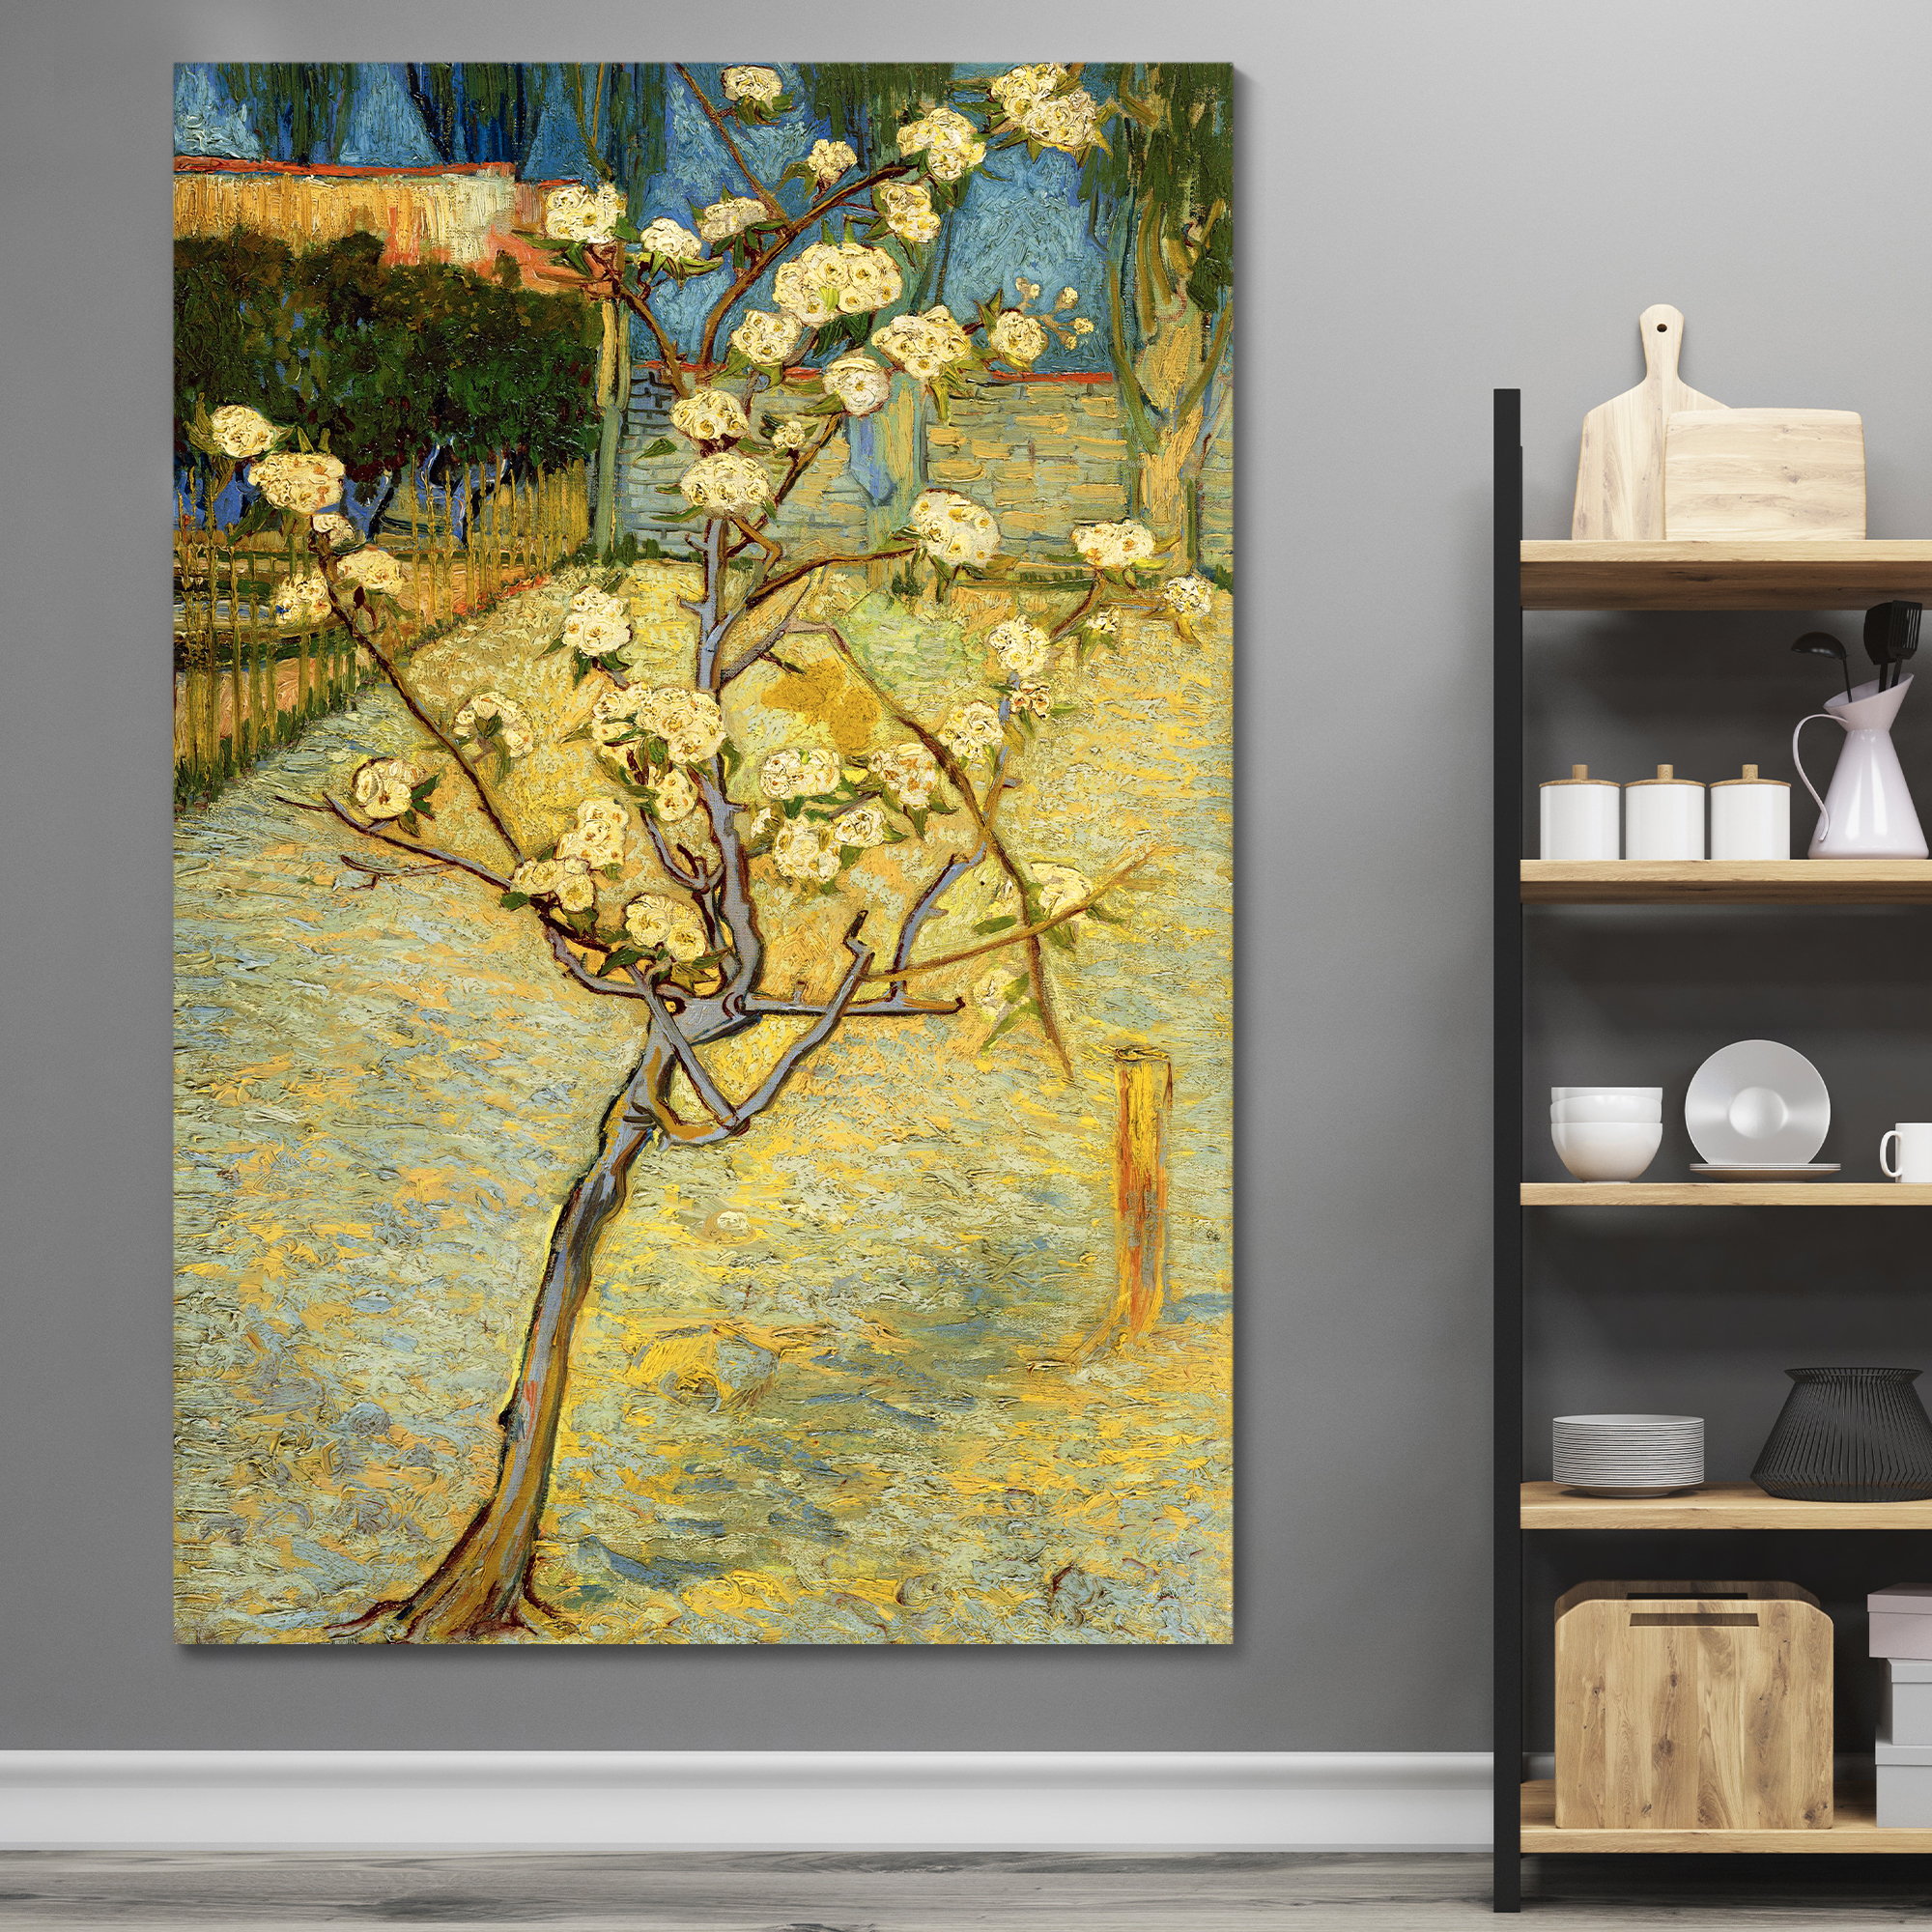 Small Pear Tree in Blossom by Vincent Van Gogh - Canvas Print Wall Art Famous Oil Painting Reproduction - 24